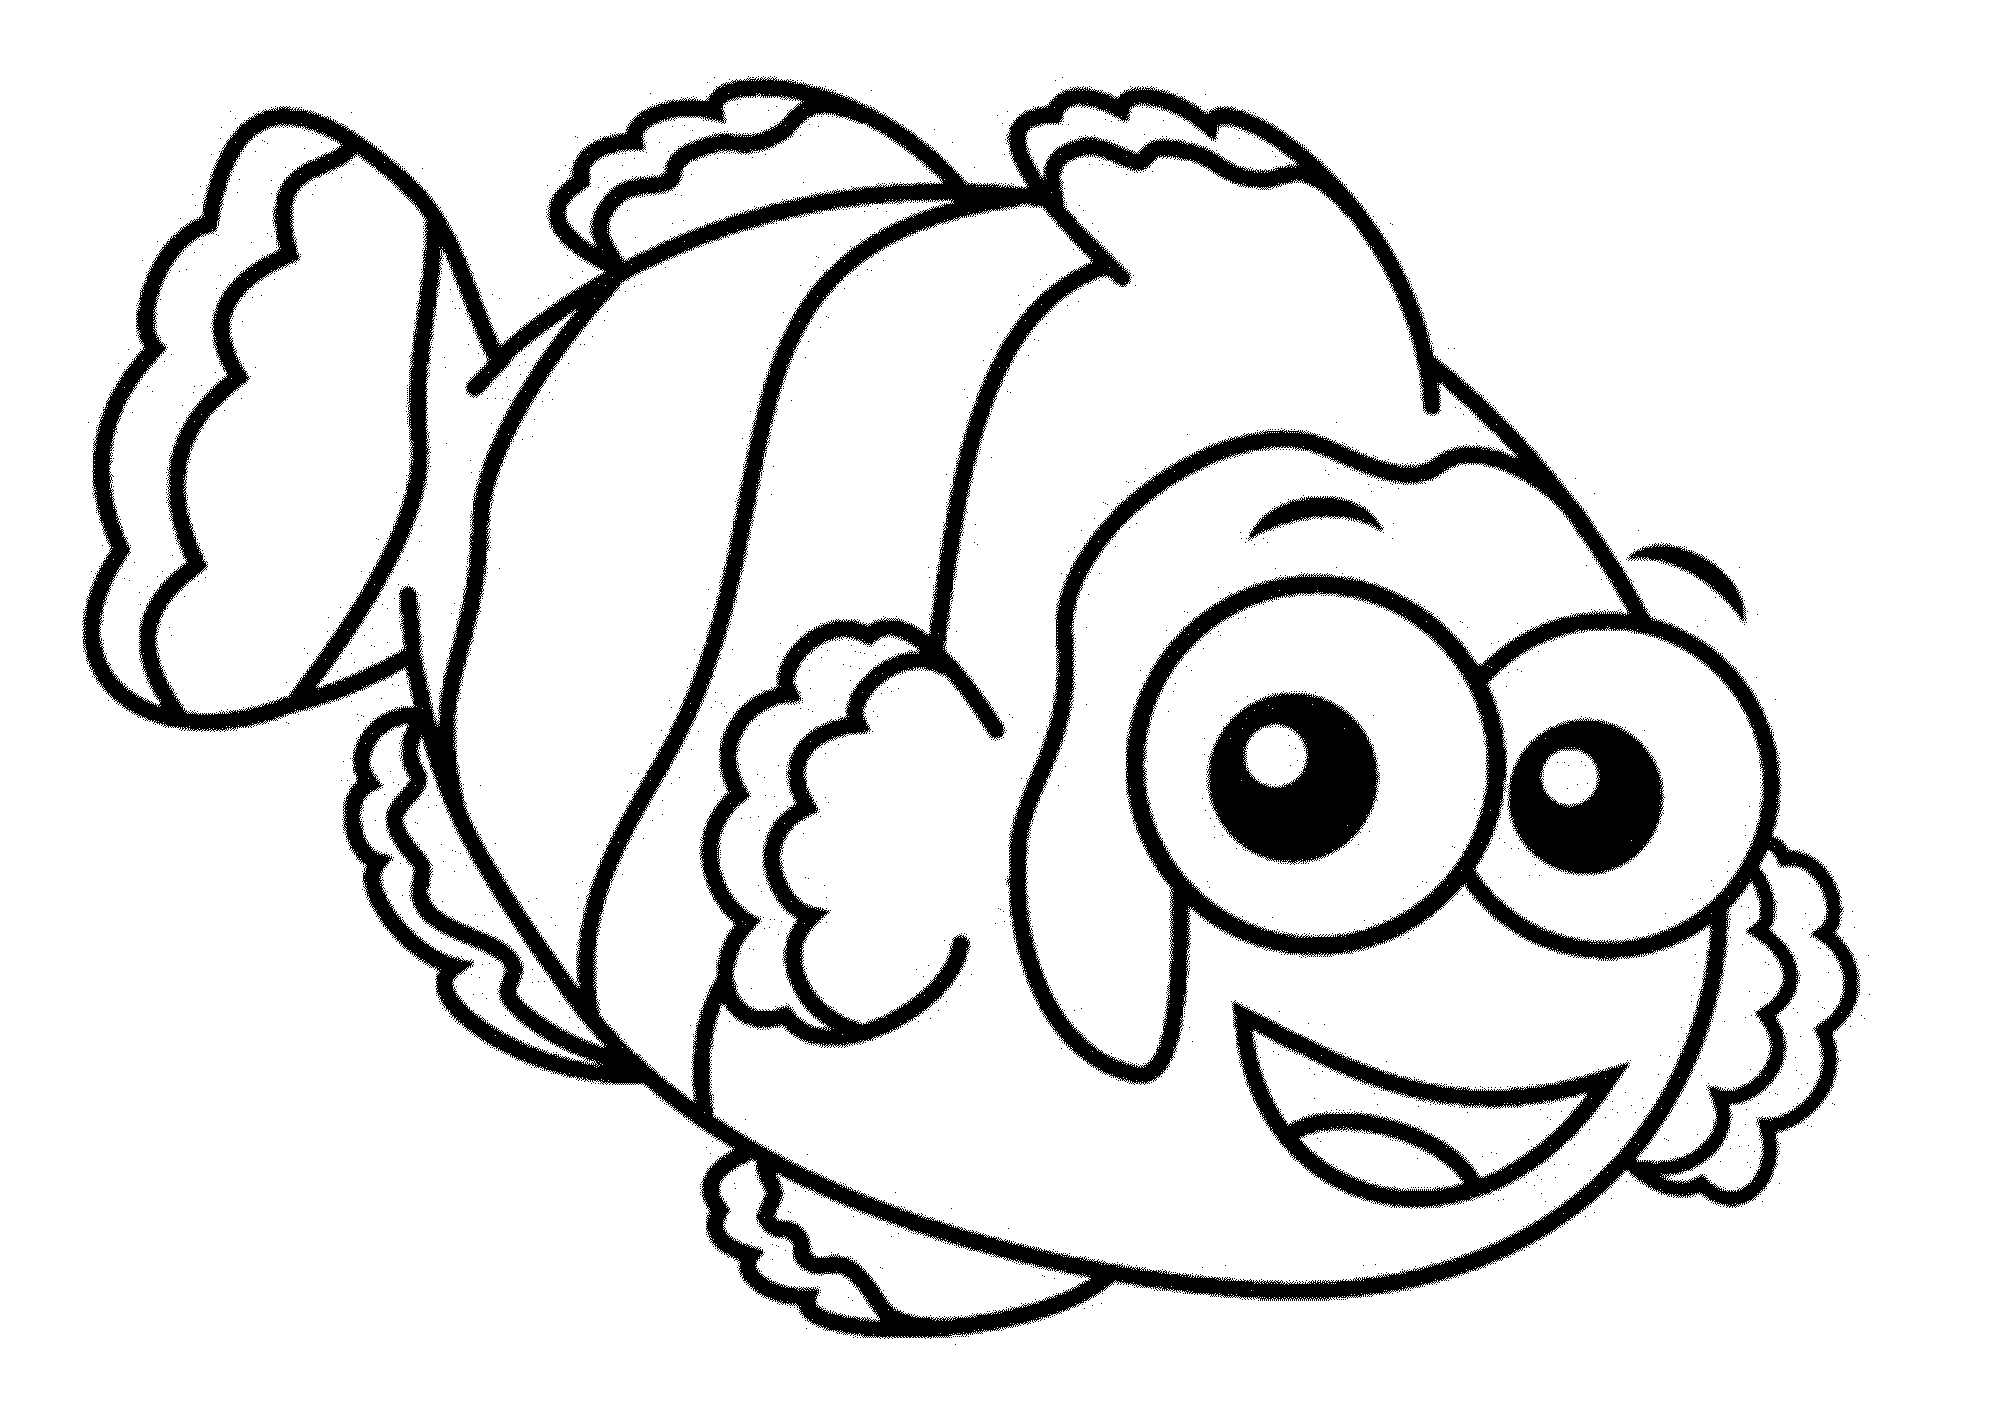 Fish Coloring Pages For Kids
 Print & Download Cute and Educative Fish Coloring Pages